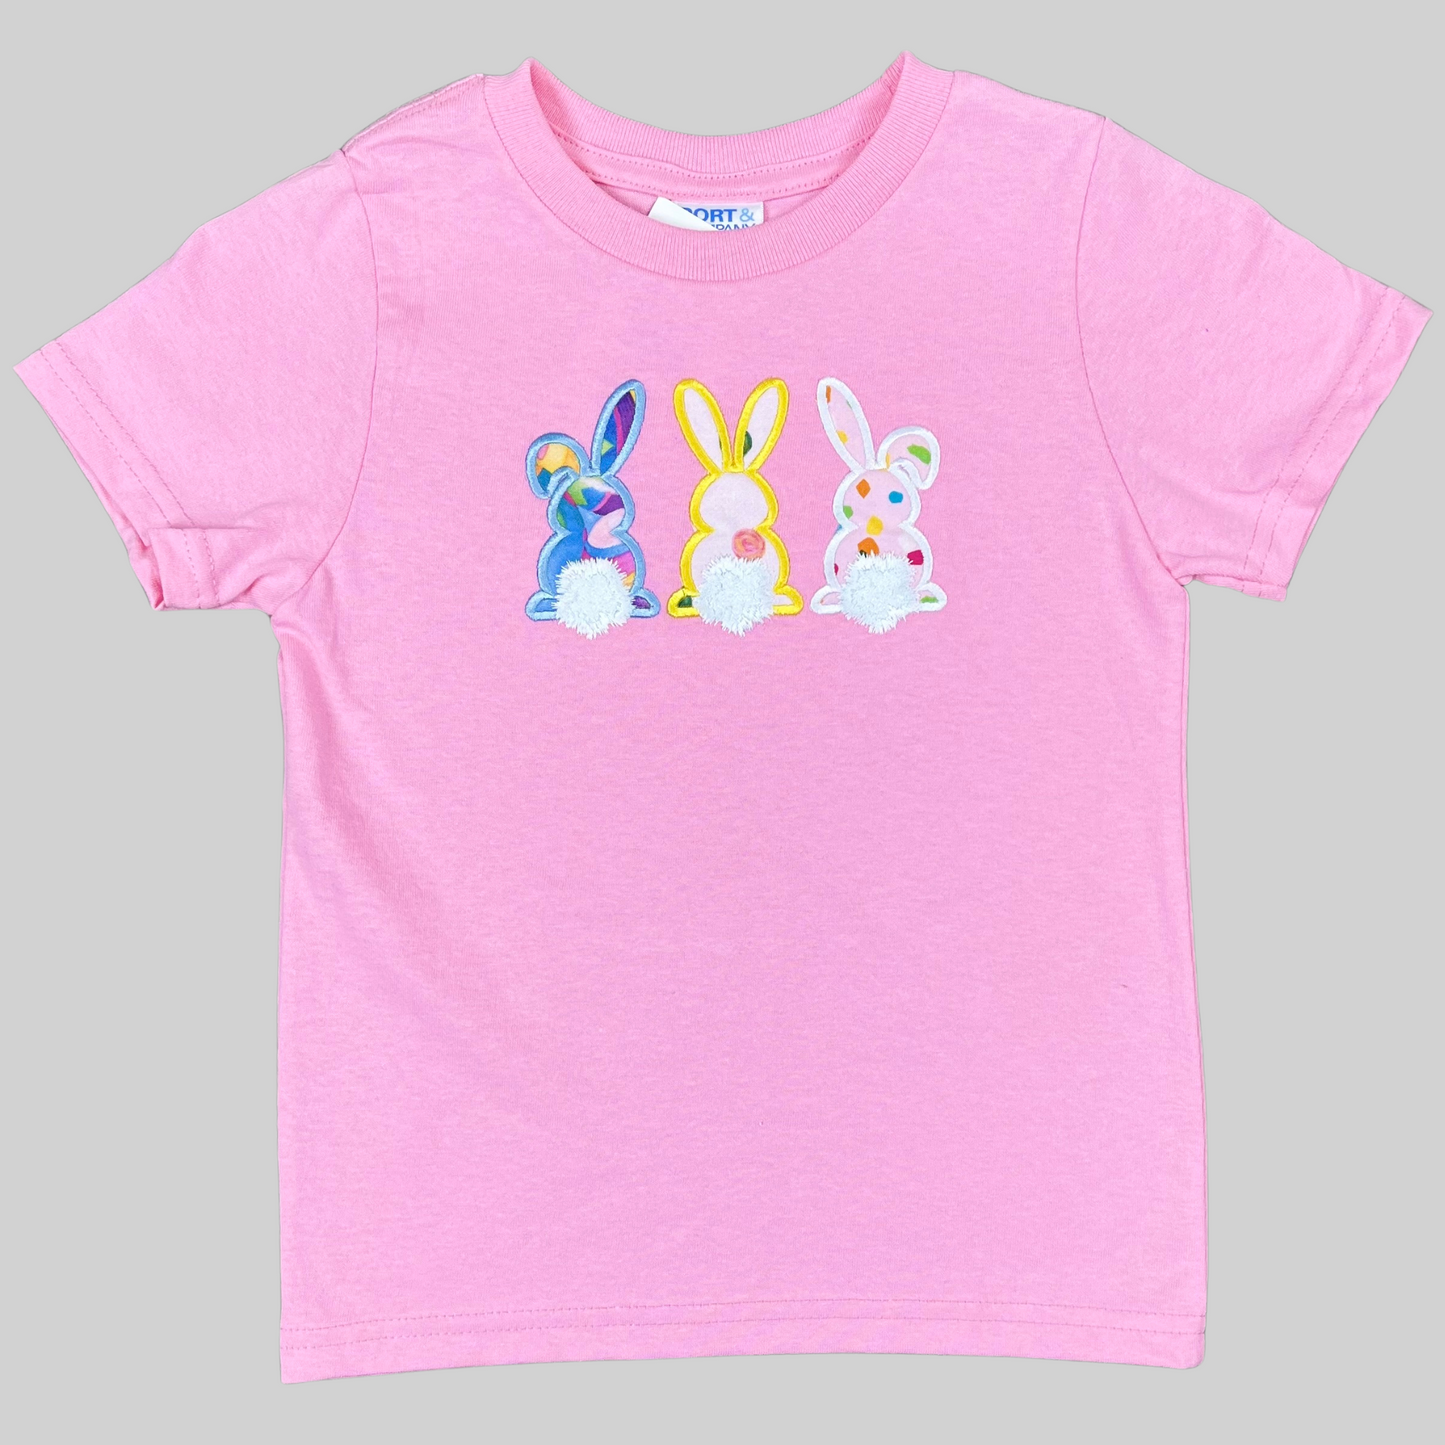 Bunny Applique Embroidered Kids Shirt